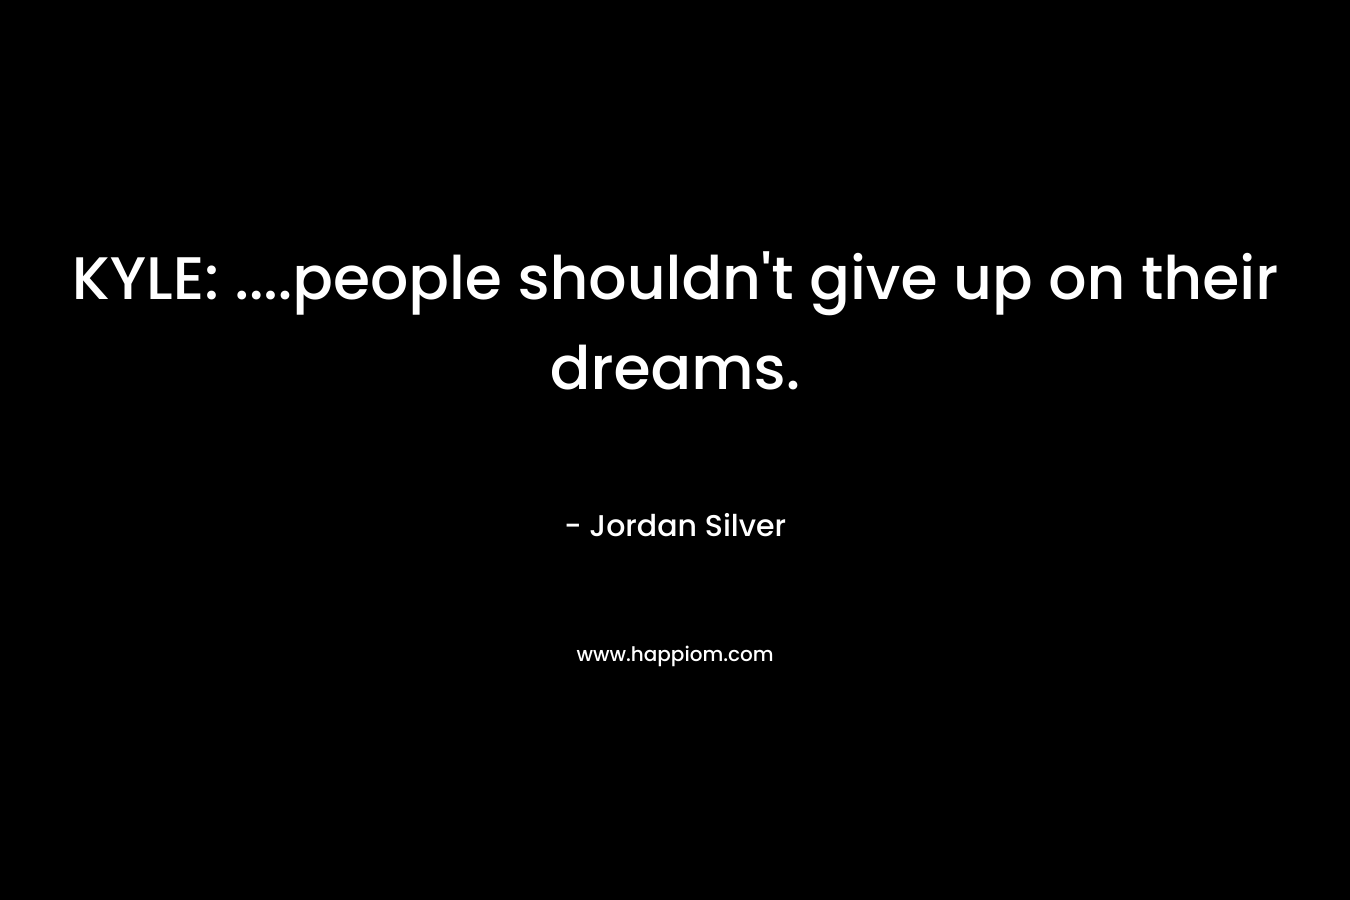 KYLE: ....people shouldn't give up on their dreams.